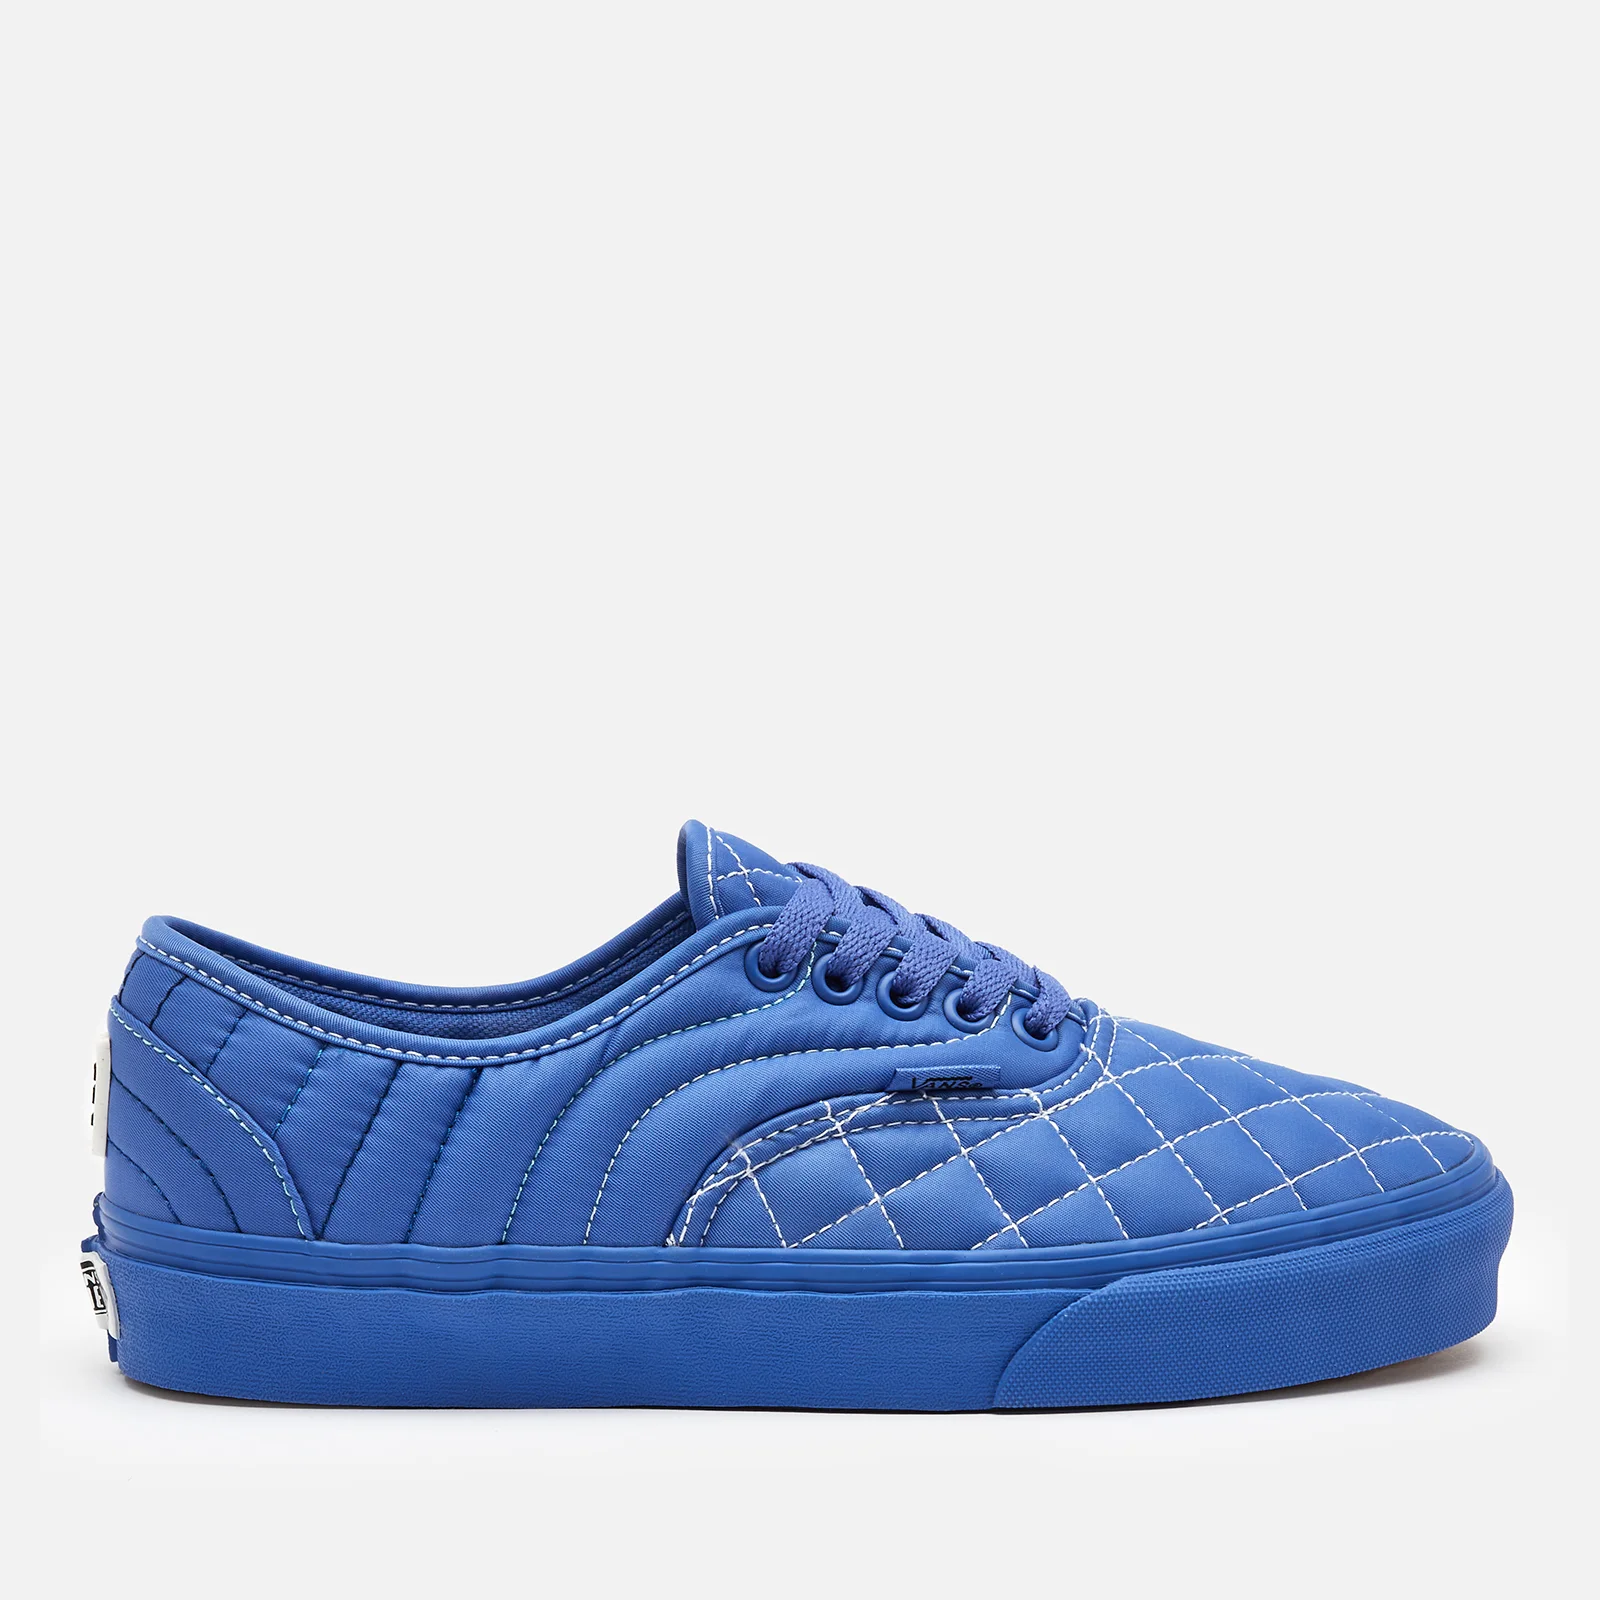 Vans X Opening Ceremony Authentic Quilted Trainers - Baja Blue Image 1